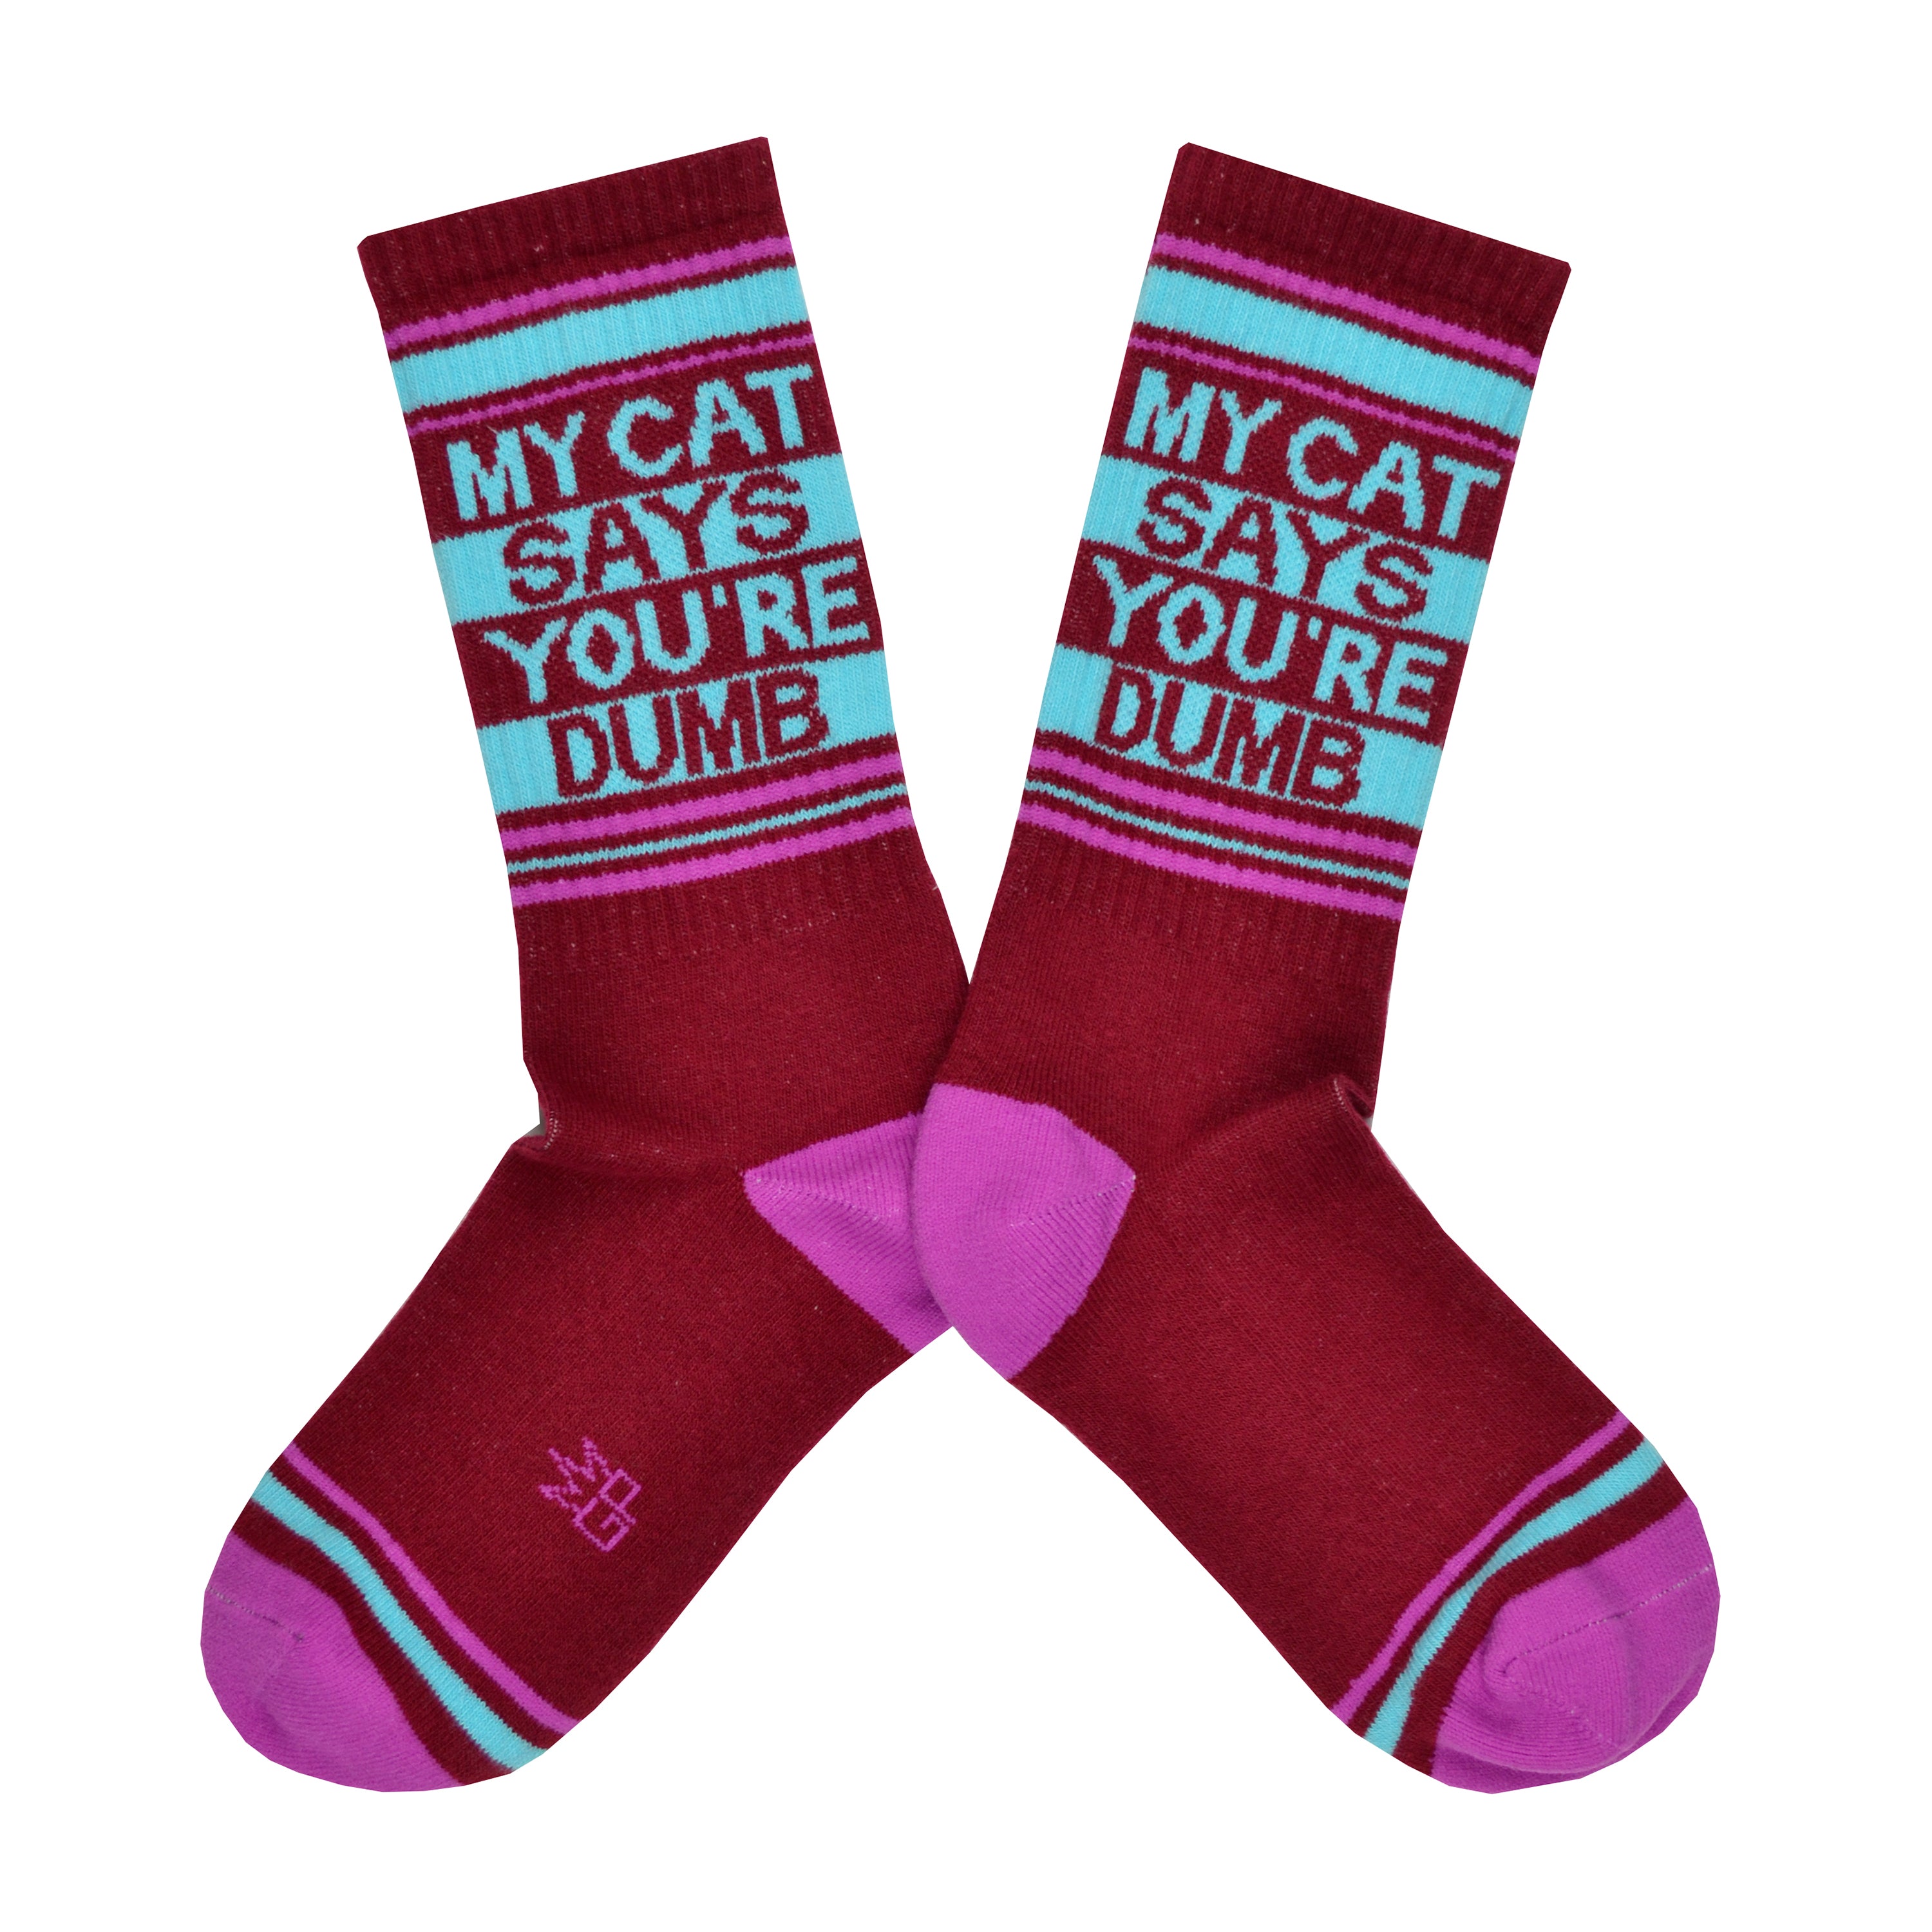 Shown in a flatlay, a pair of Gumball Poodle brand unisex cotton crew socks in maroon with a magenta heel/toe and a blue striped cuff that says, 'MY CAT SAYS YOUR'RE DUMB